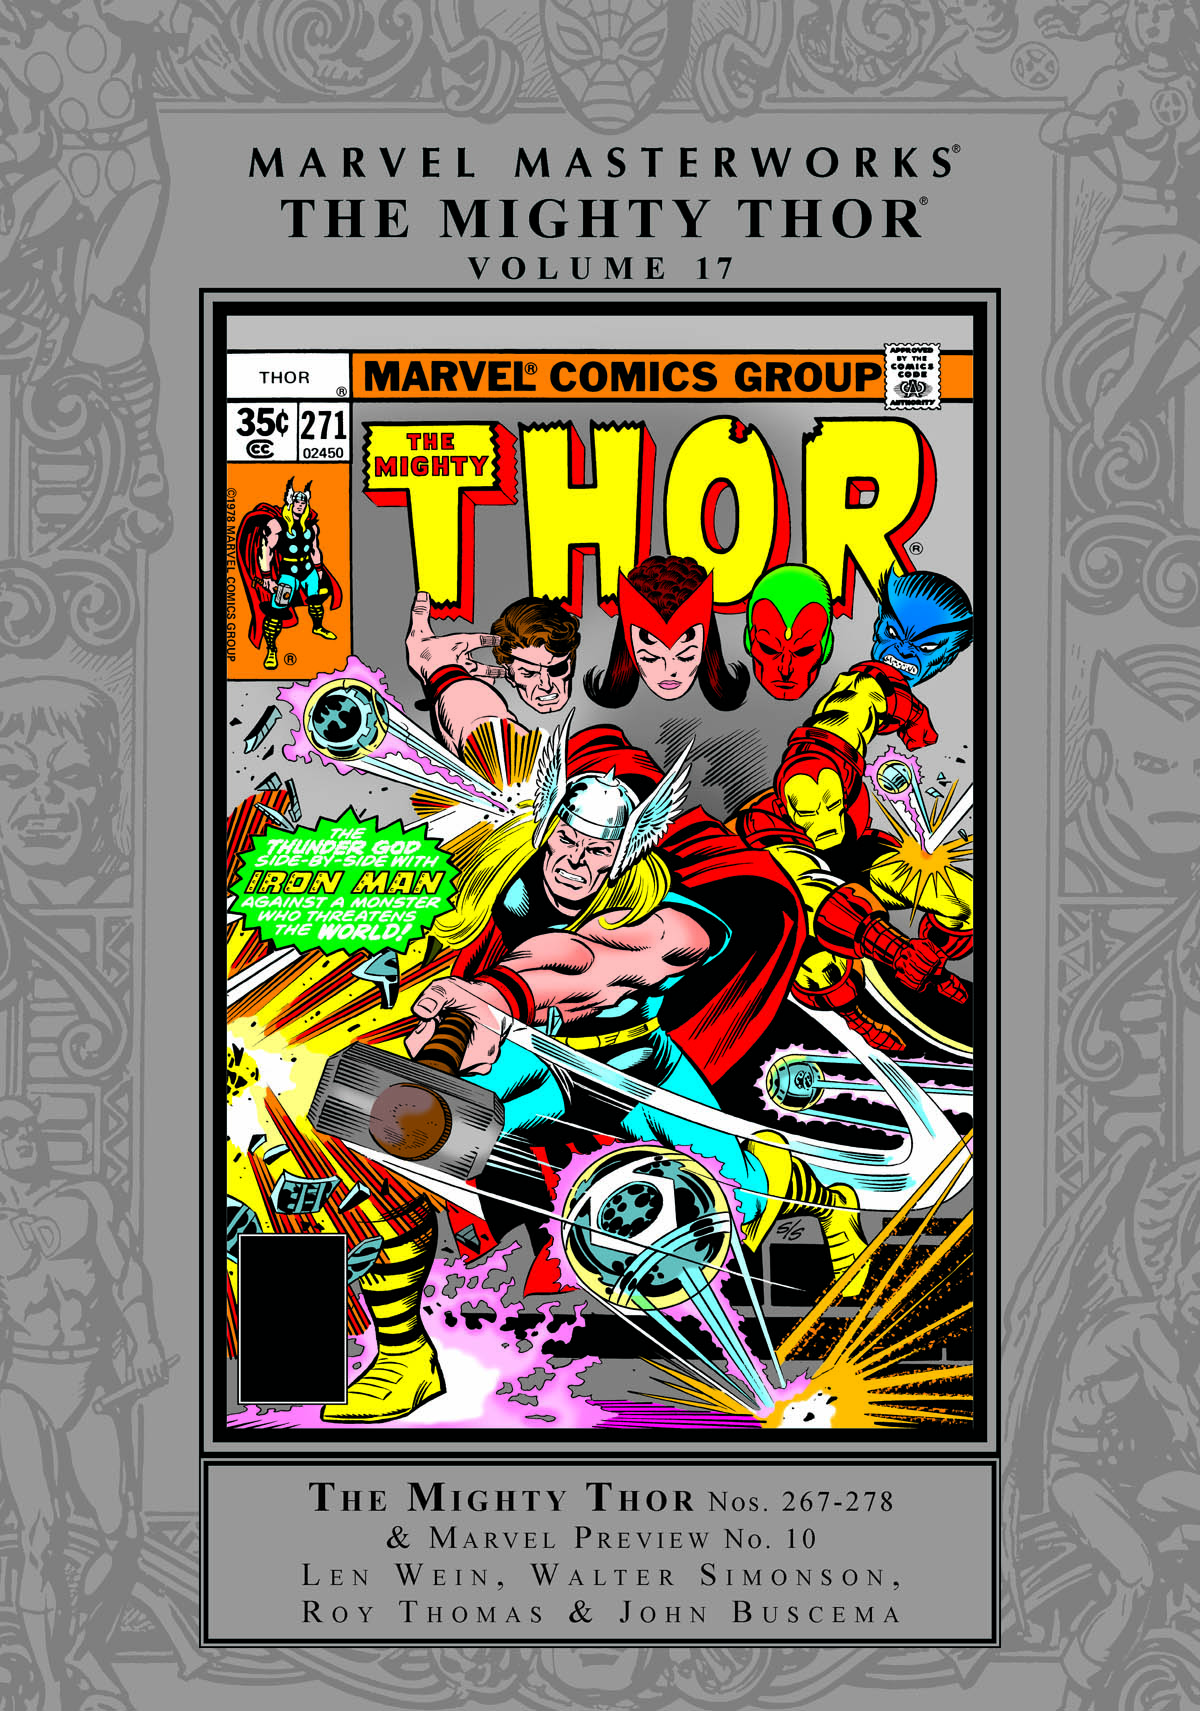 Marvel Masterworks: The Mighty Thor Vol. 17 (Trade Paperback)